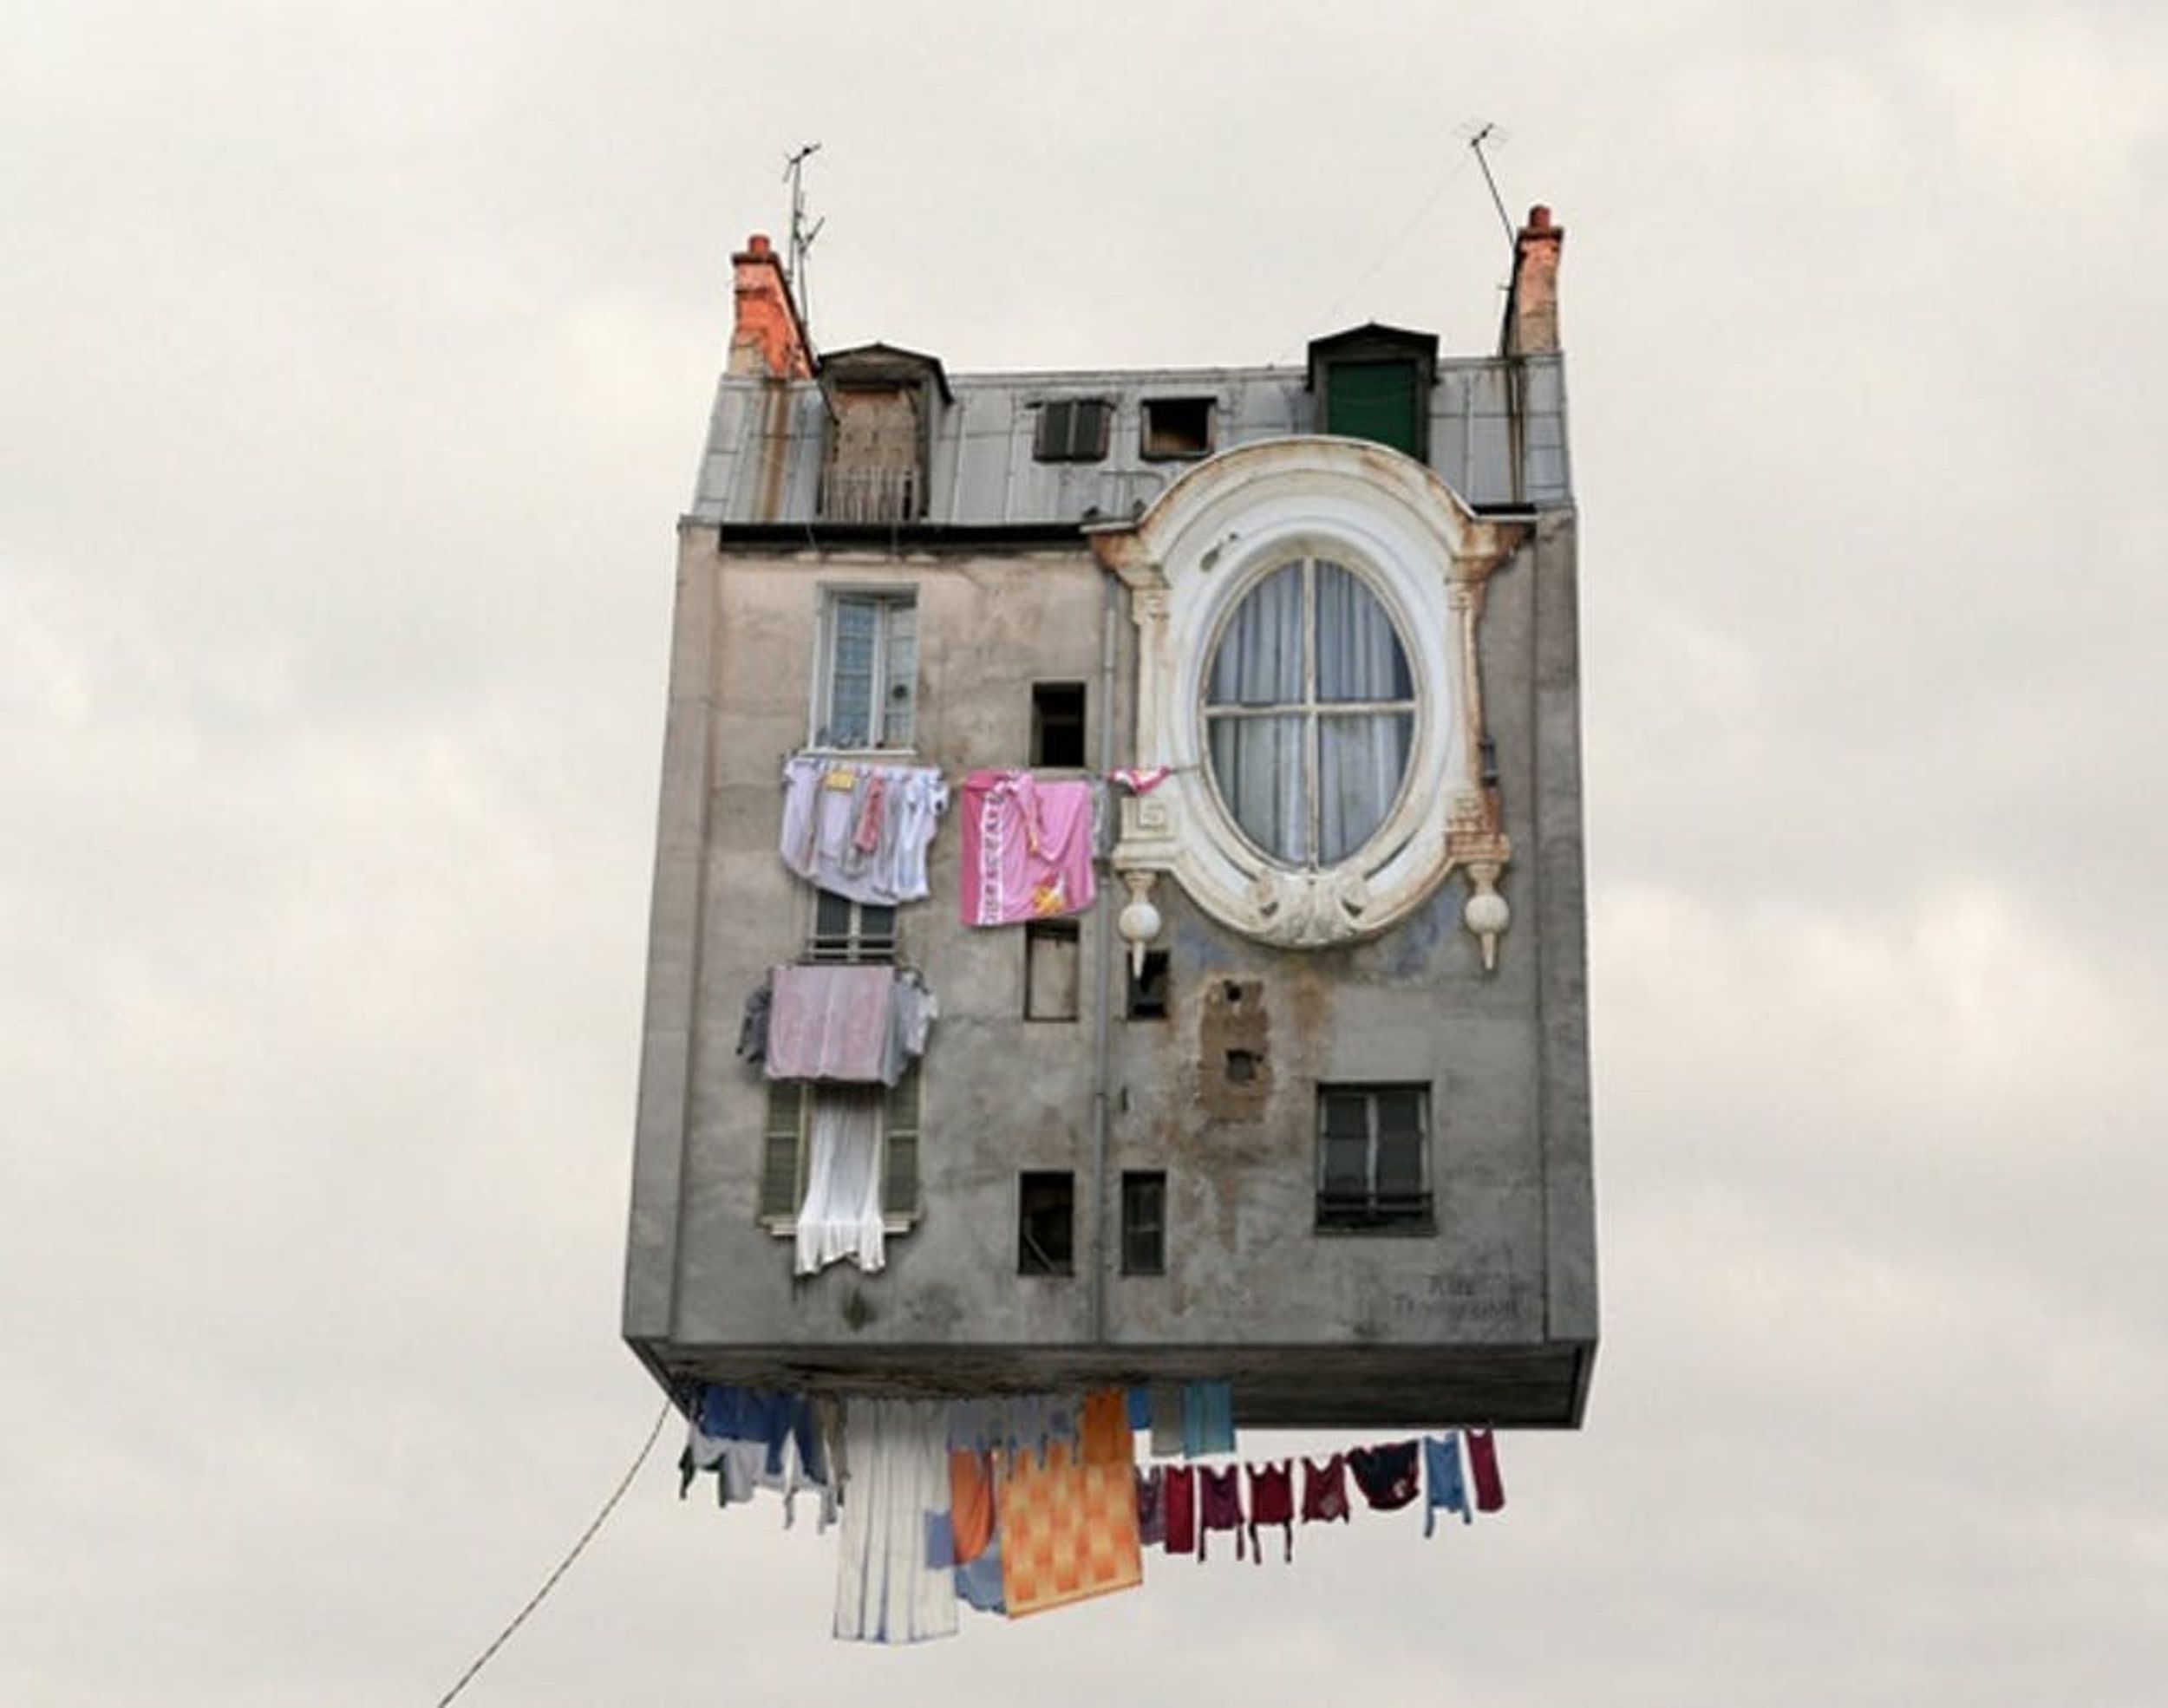 These Flying Houses Take “Up” to Super Artsy Levels